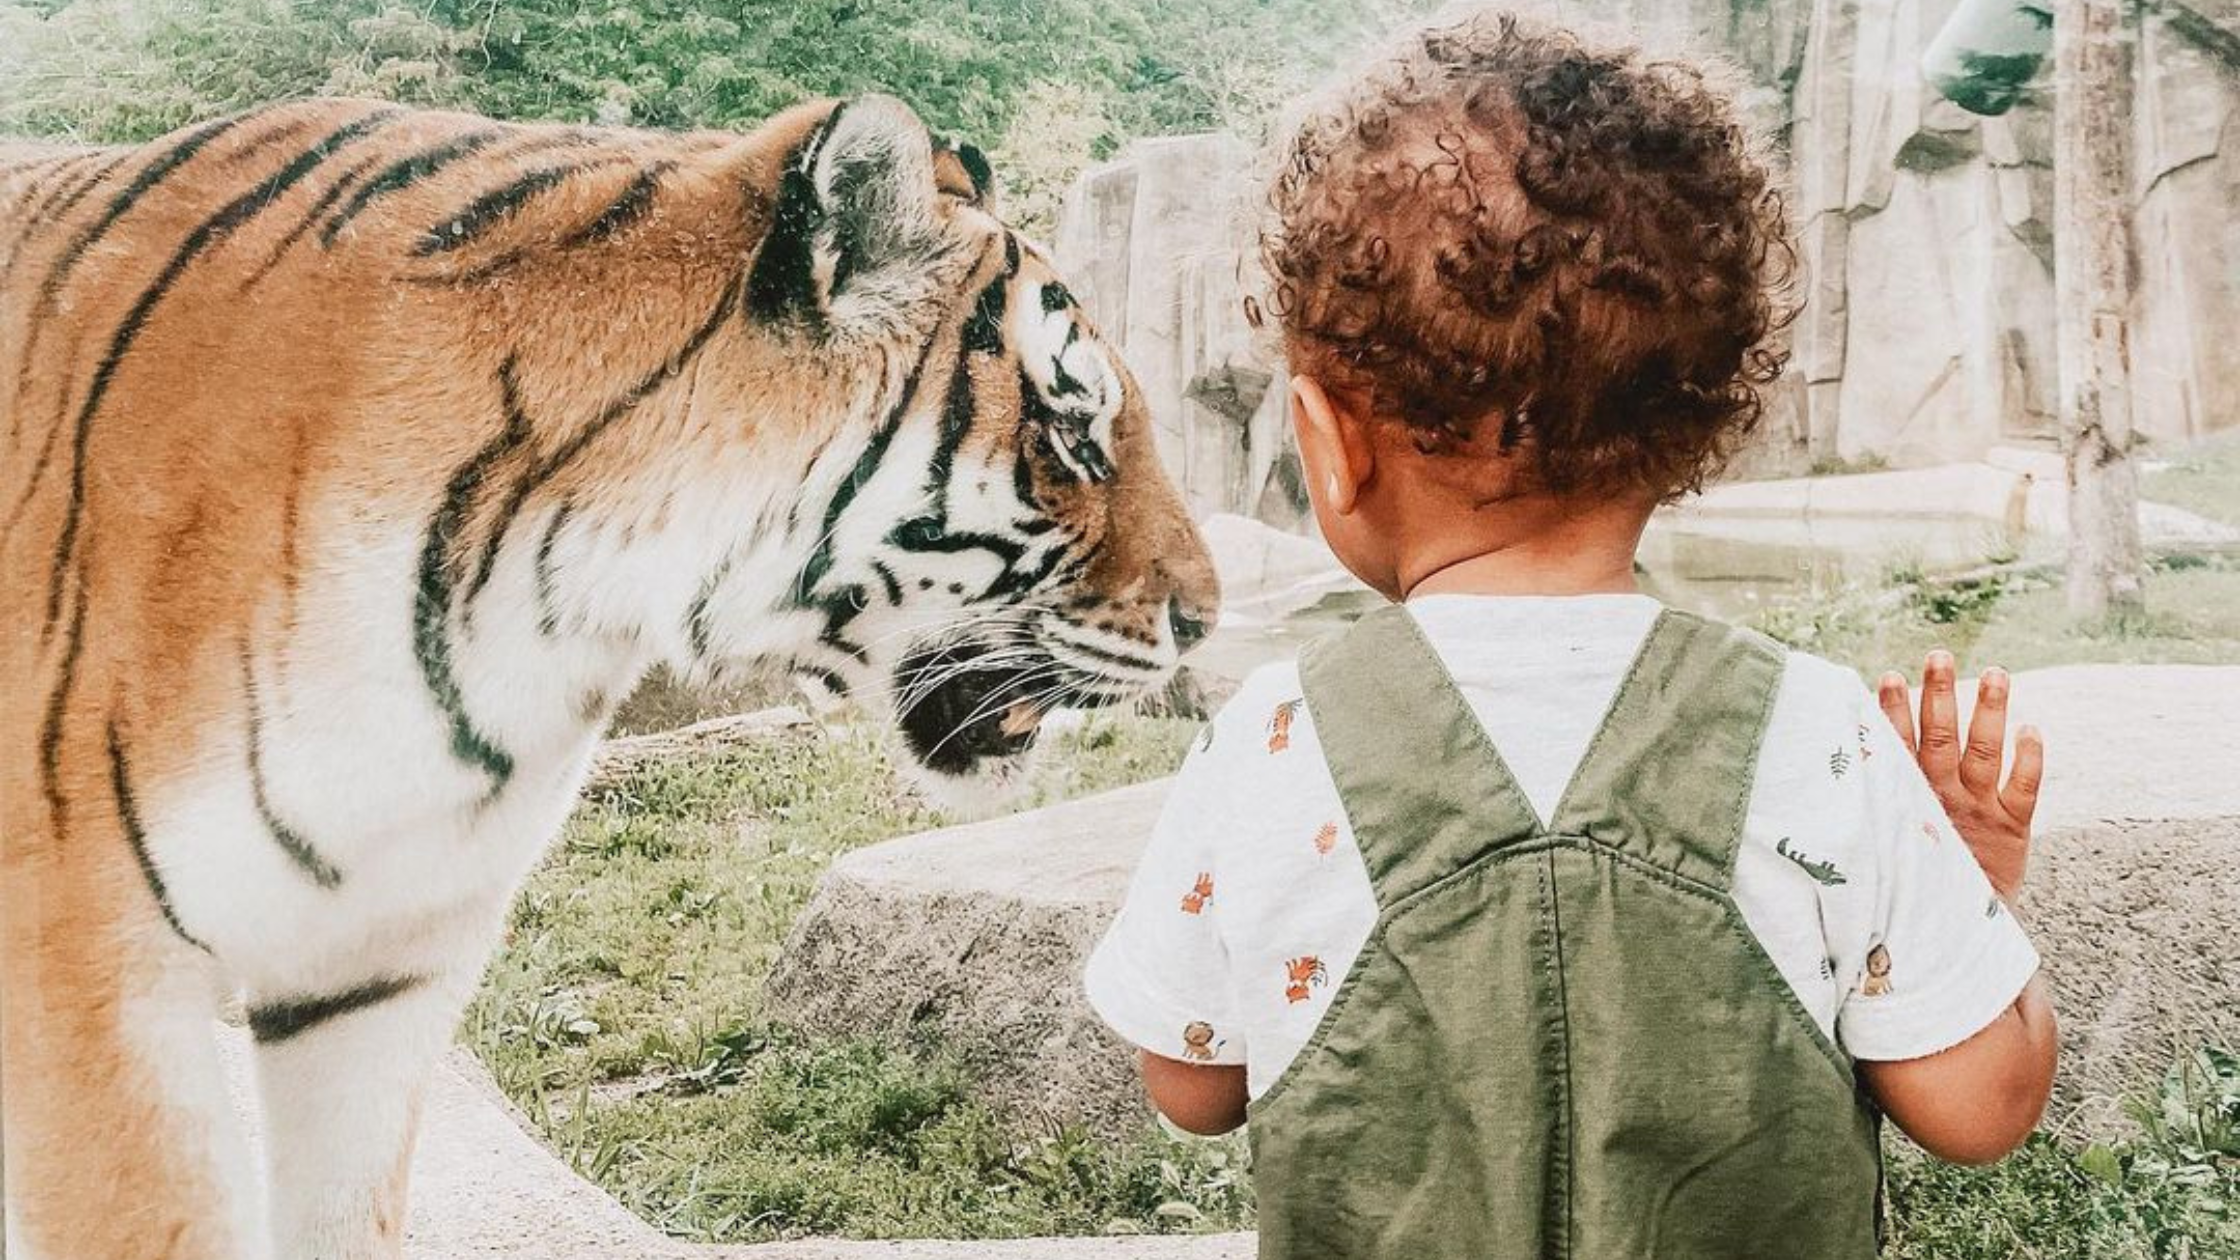 Child looking at a tiger through glass display at Milwaukee County Zoo